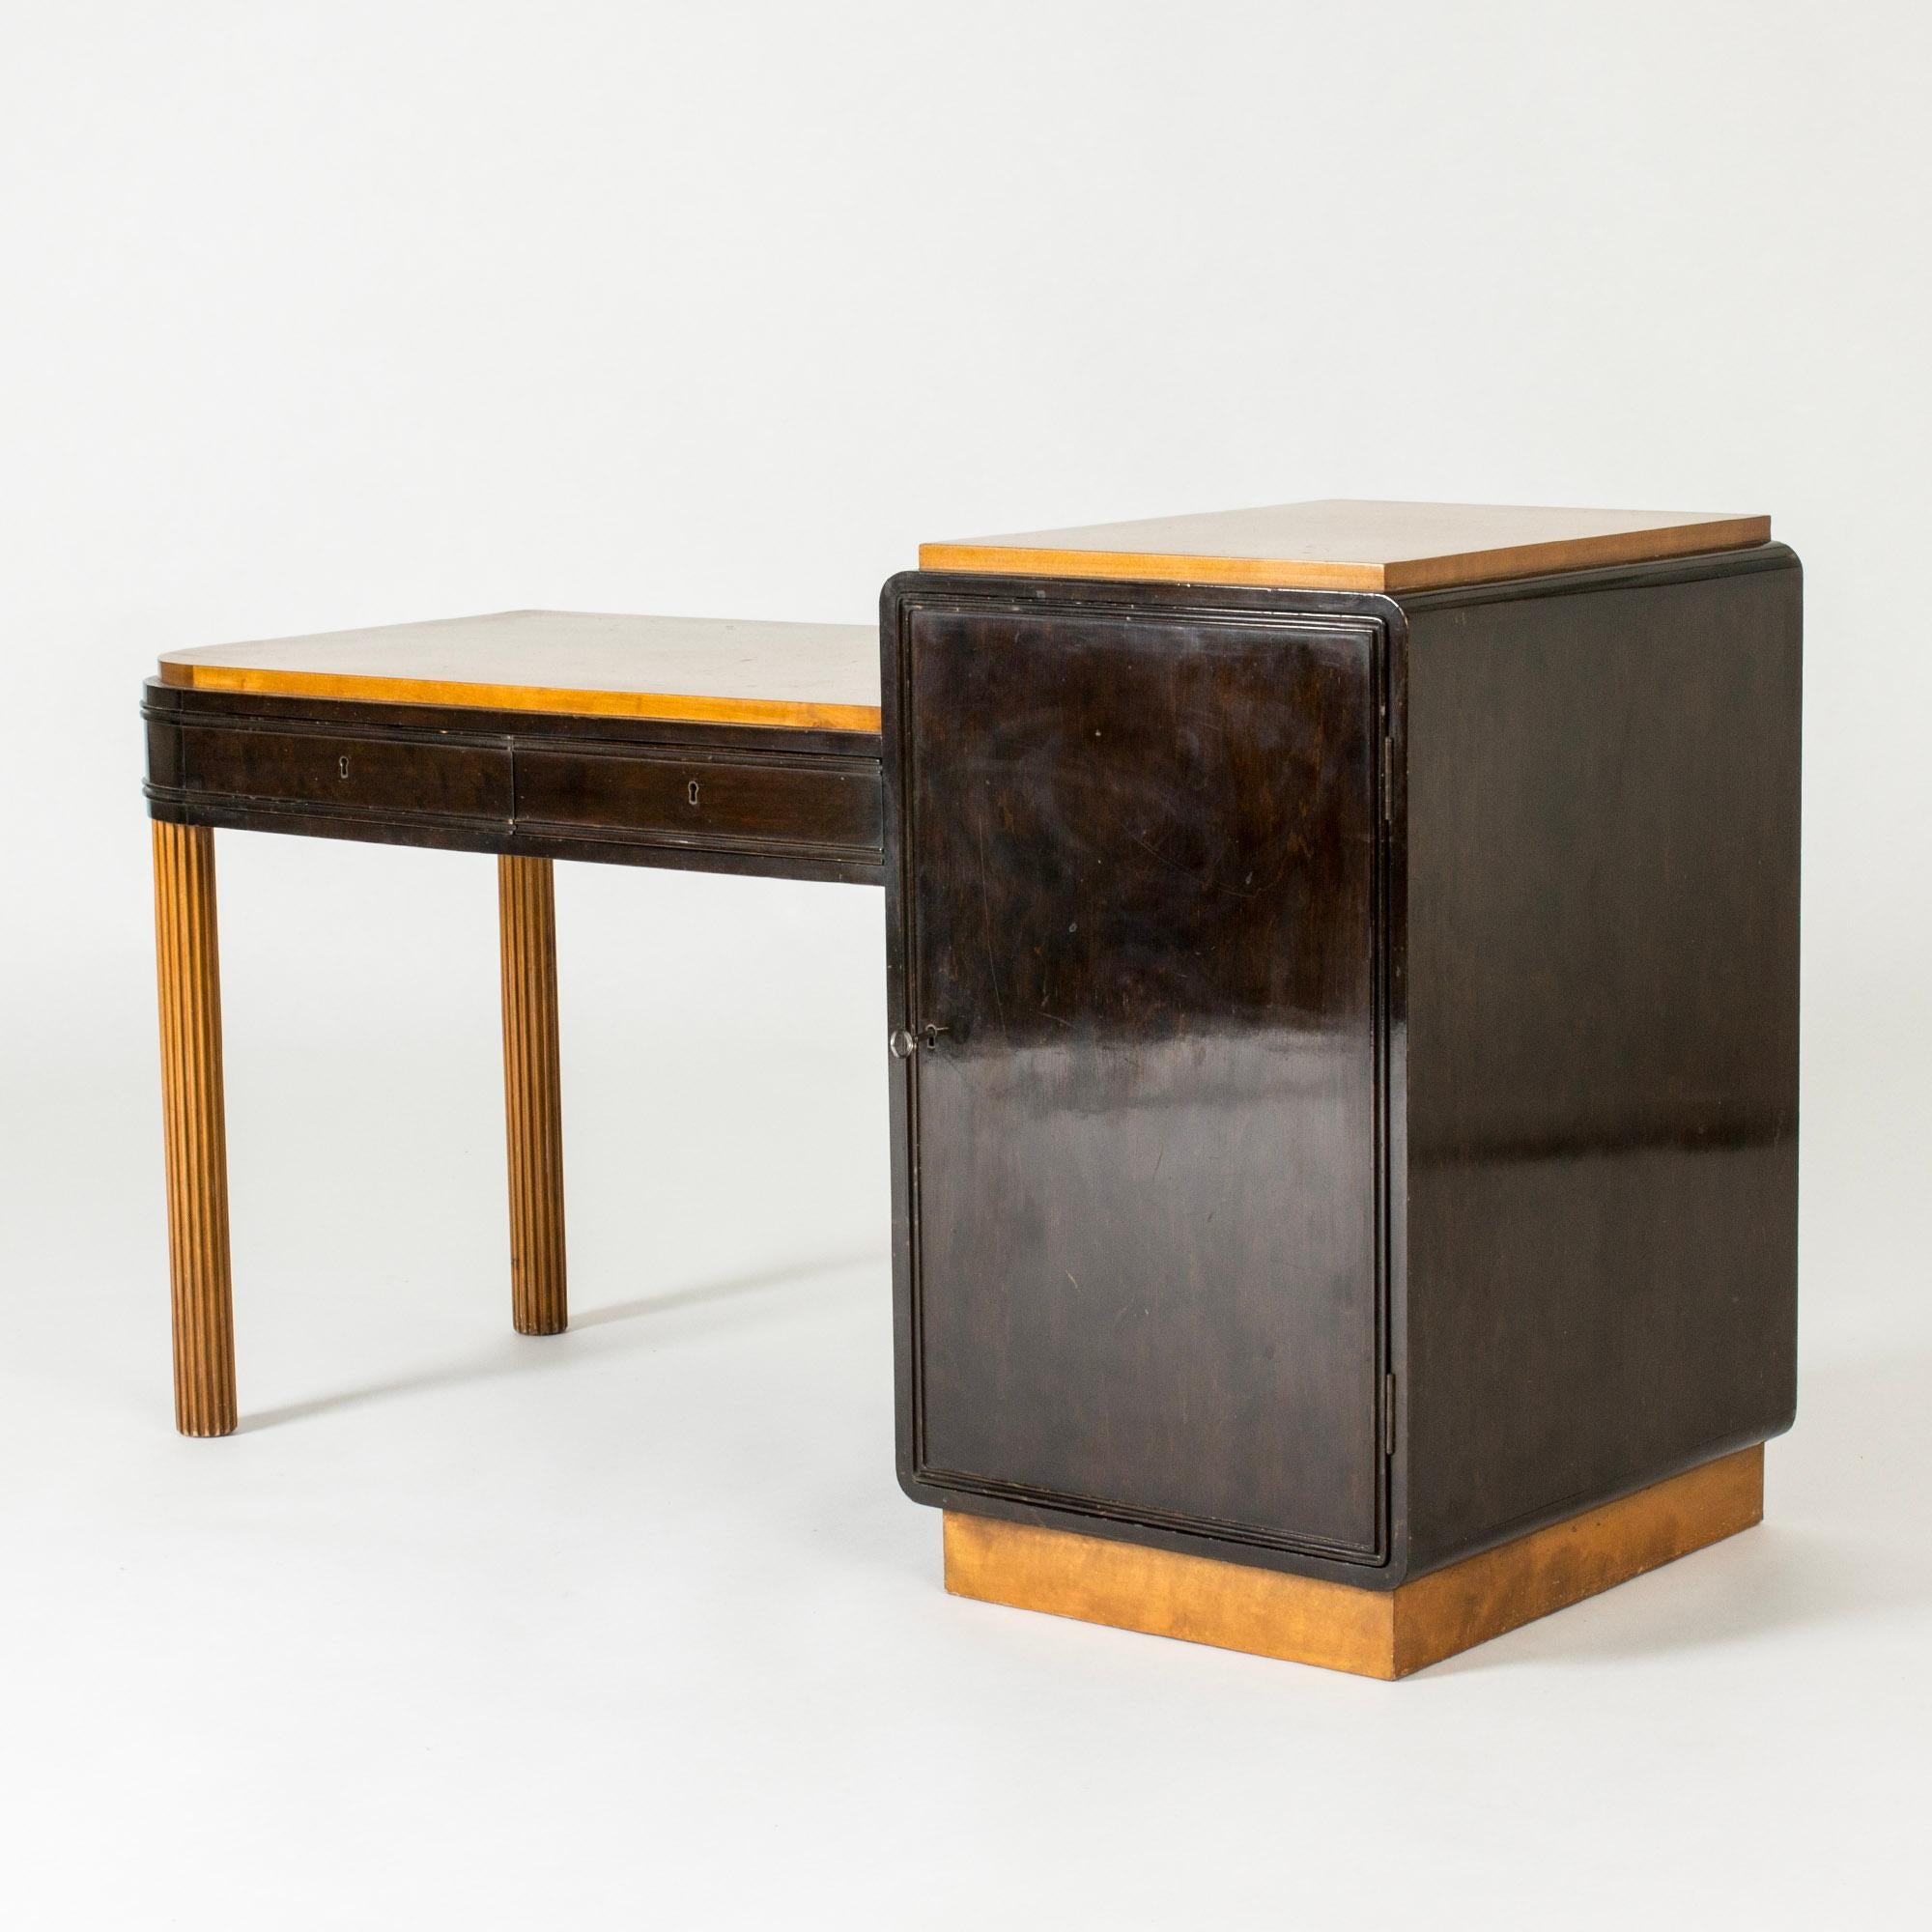 Functionalist entryway bench with drawers and small cabinet by Axel Einar Hjorth. Made from beech, partially stained black. Clean lines with rounded corners, legs embossed with stripes.

Height 55/65 cm.